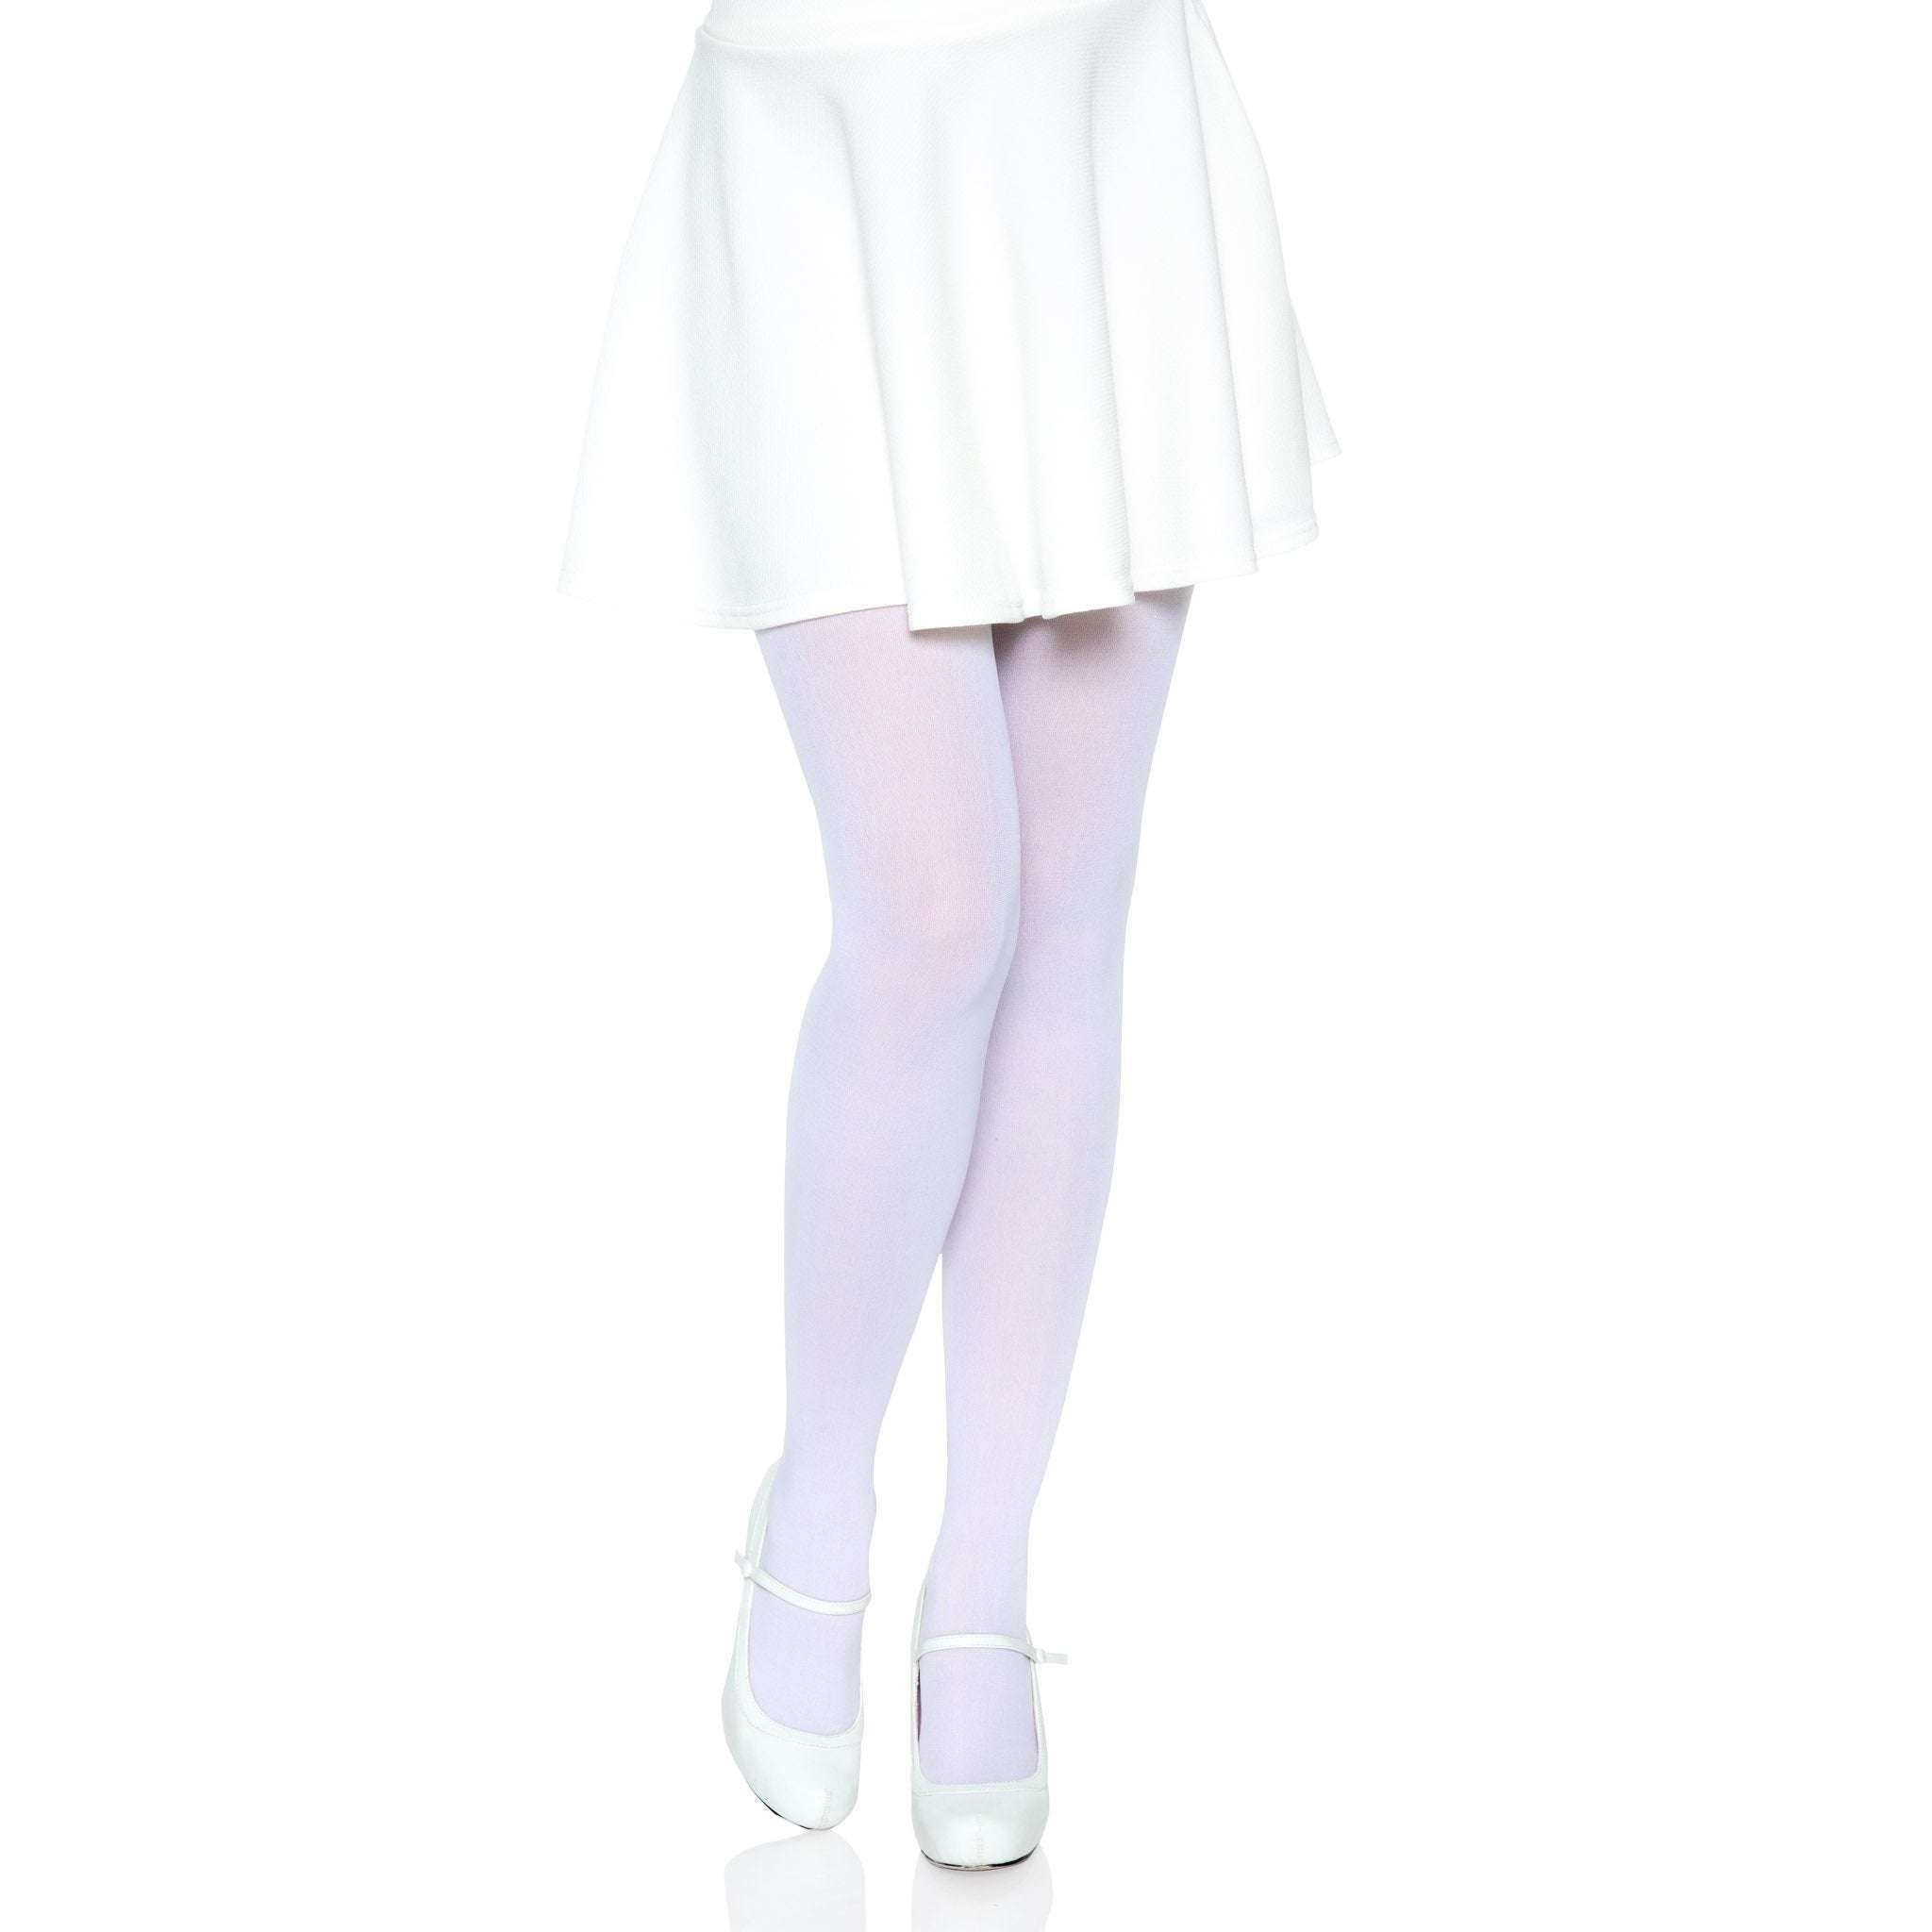 Adult Nylon Opaque Colored Tights